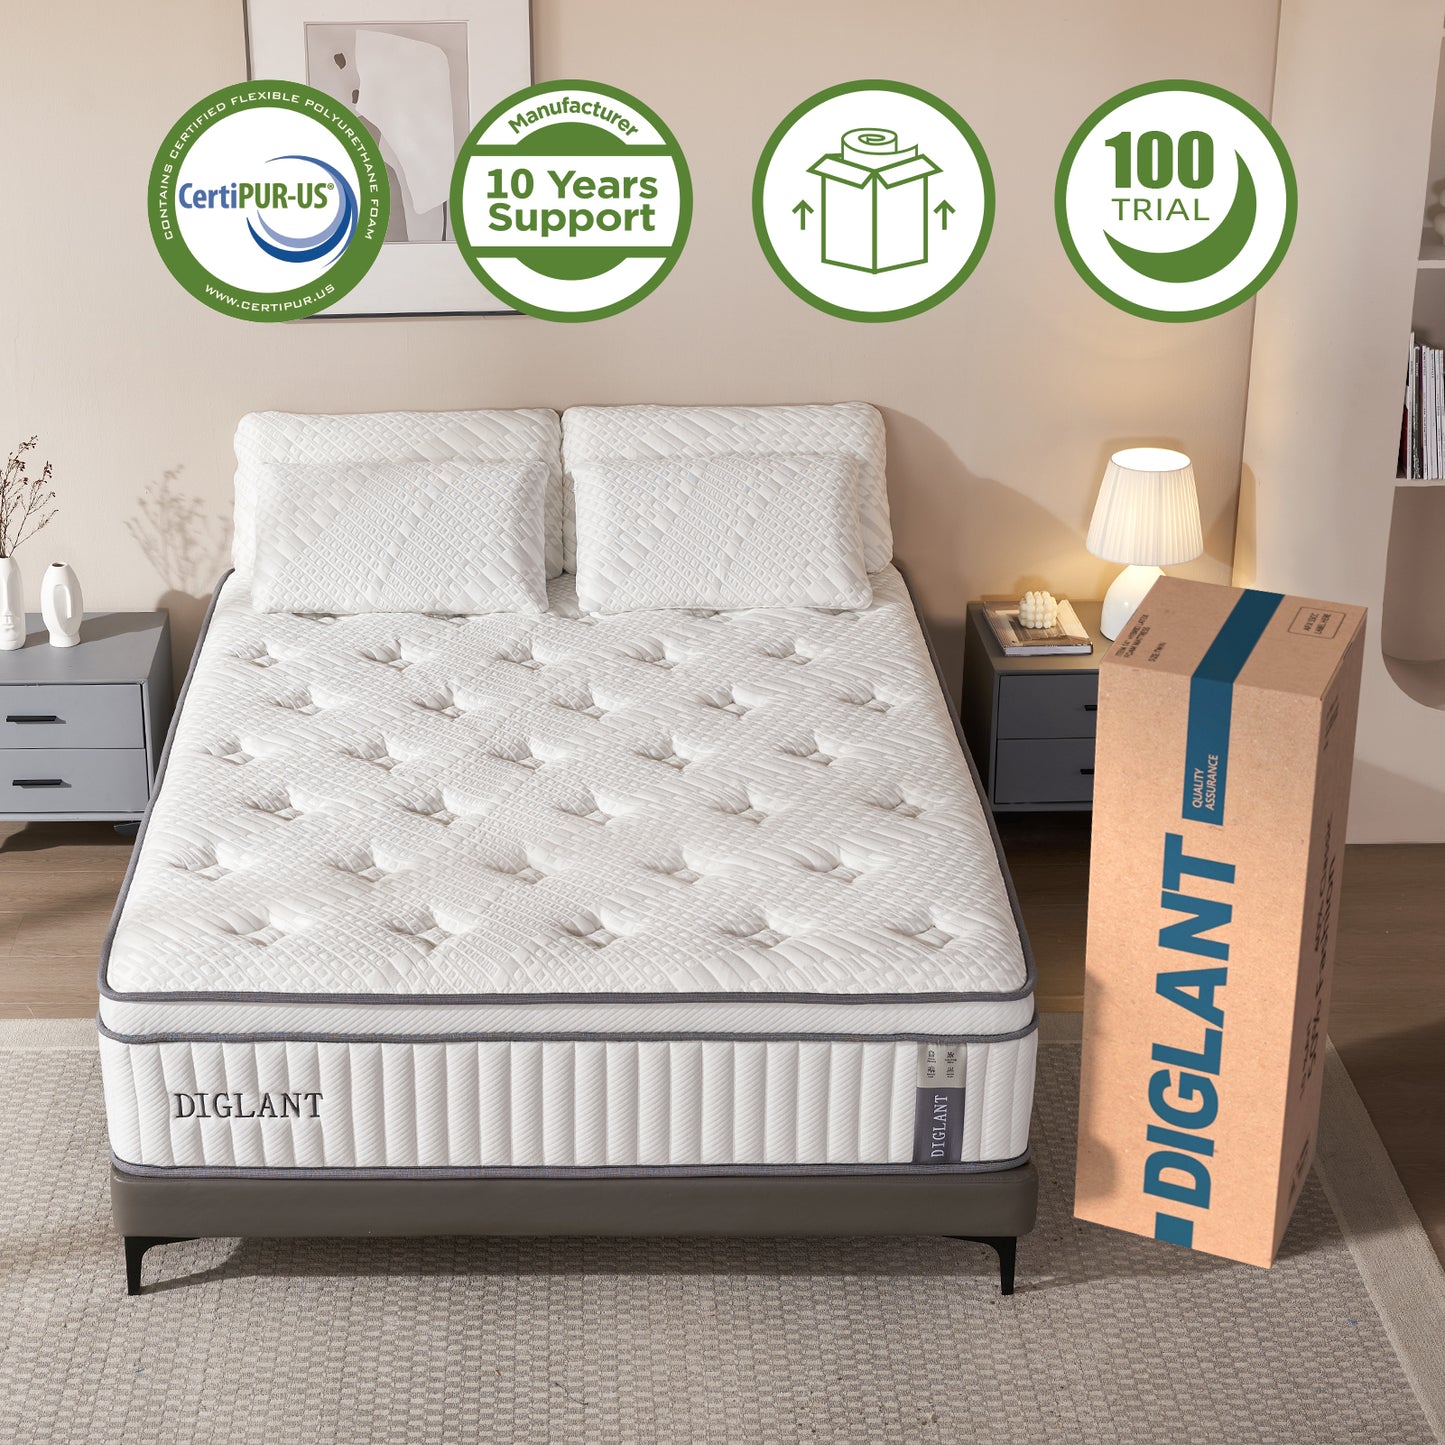 DIGLANT 14Inch Cooling Gel Memory Foam with Soft Fabric Cover, Individual Pocket Springs Mattress for Pressure Relief, Queen Mattresses in Box, Fiberglass-Free